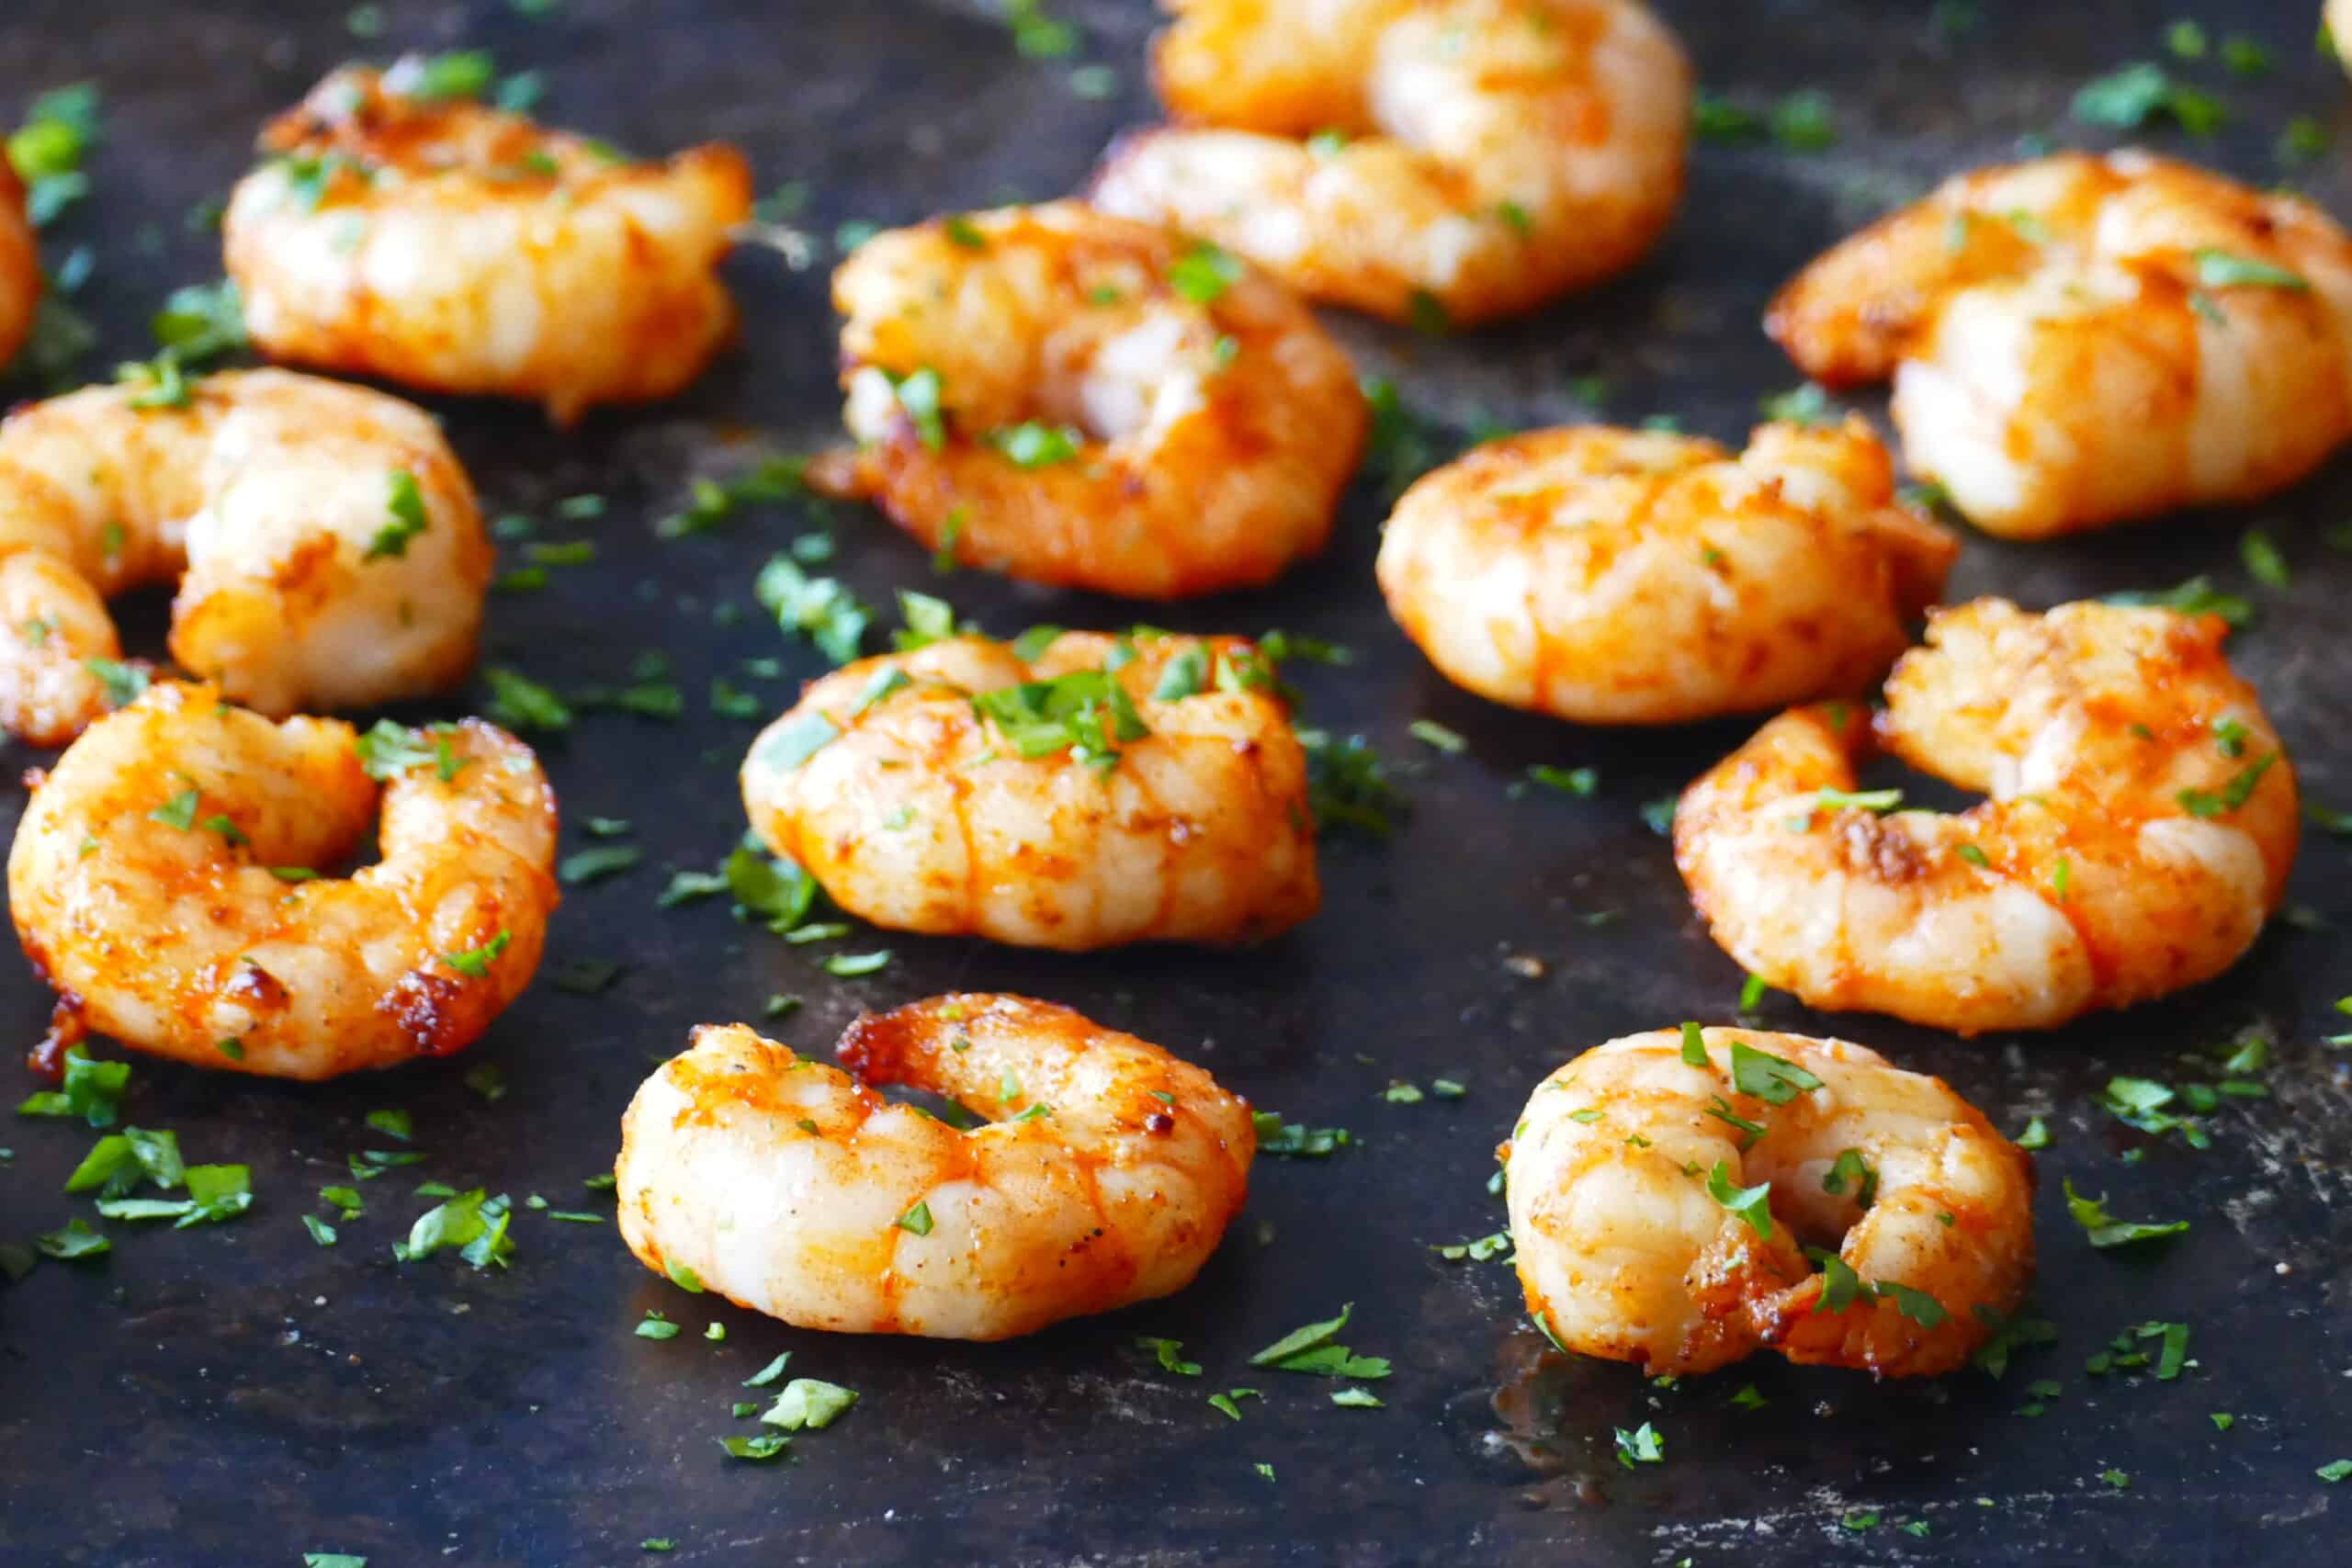 How To Cook Frozen Fully Cooked Shrimp - Recipes.net